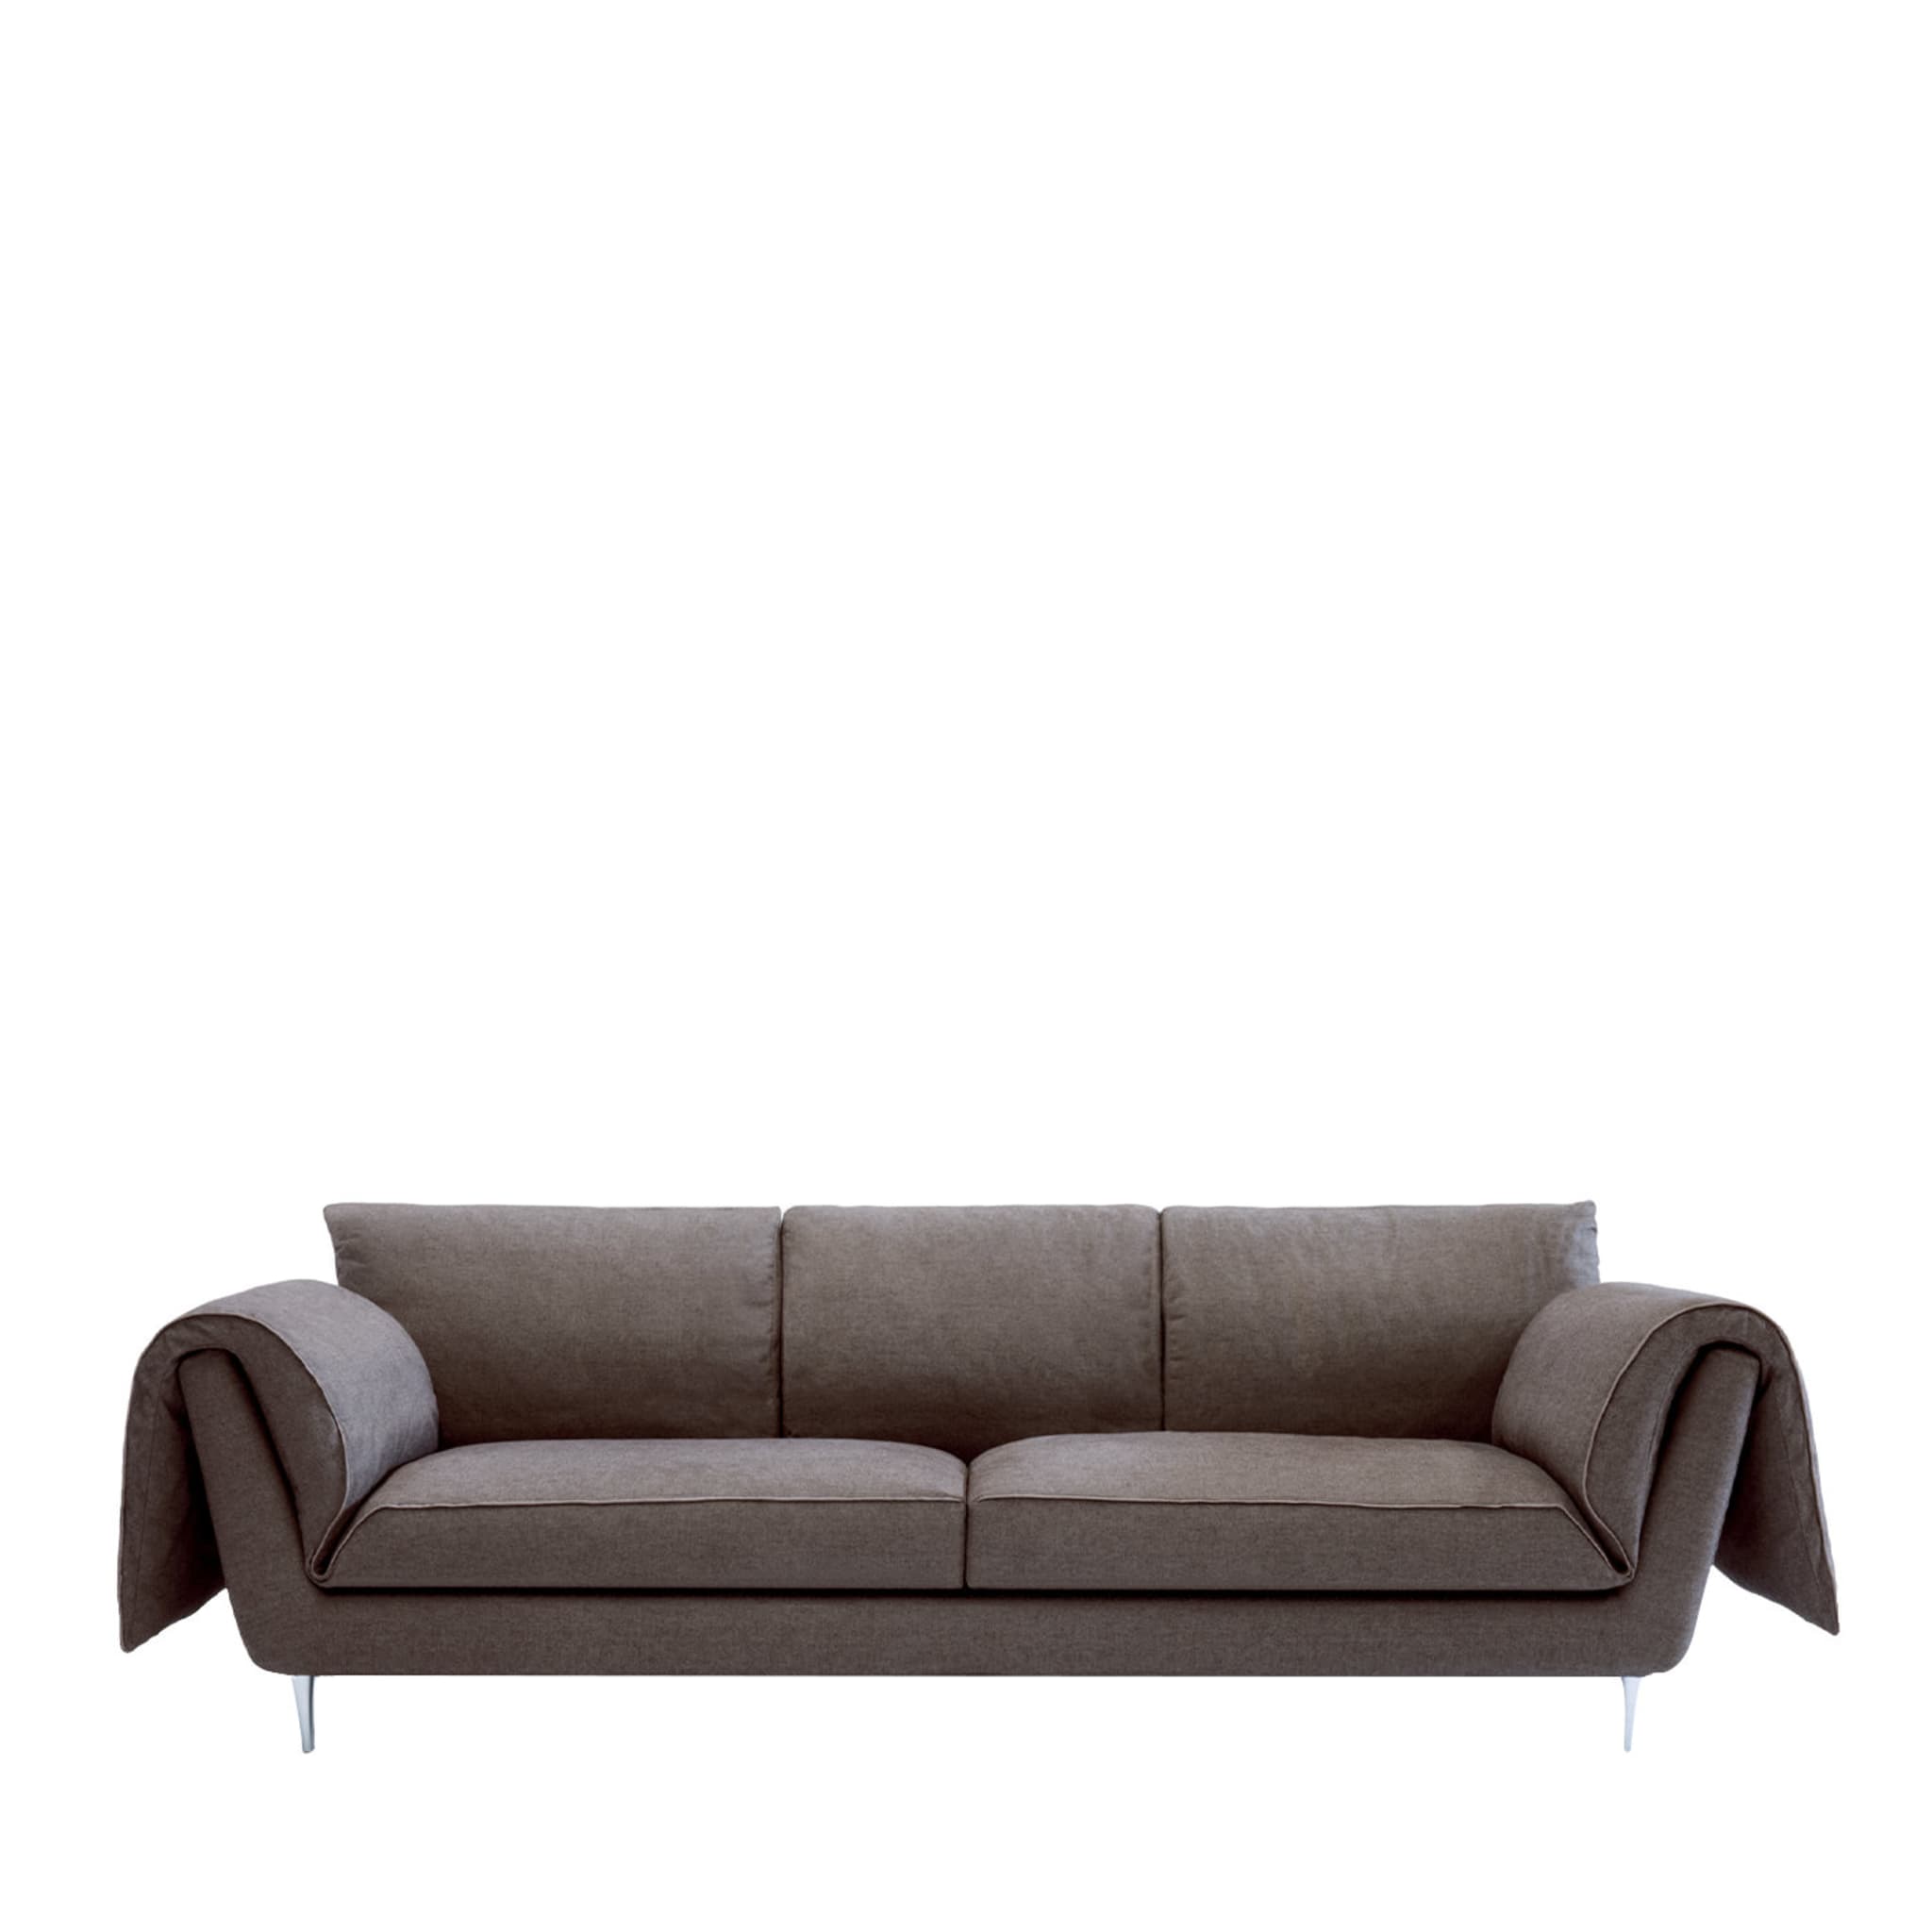 Casquet Ecological Sofa by ddpstudio - Main view